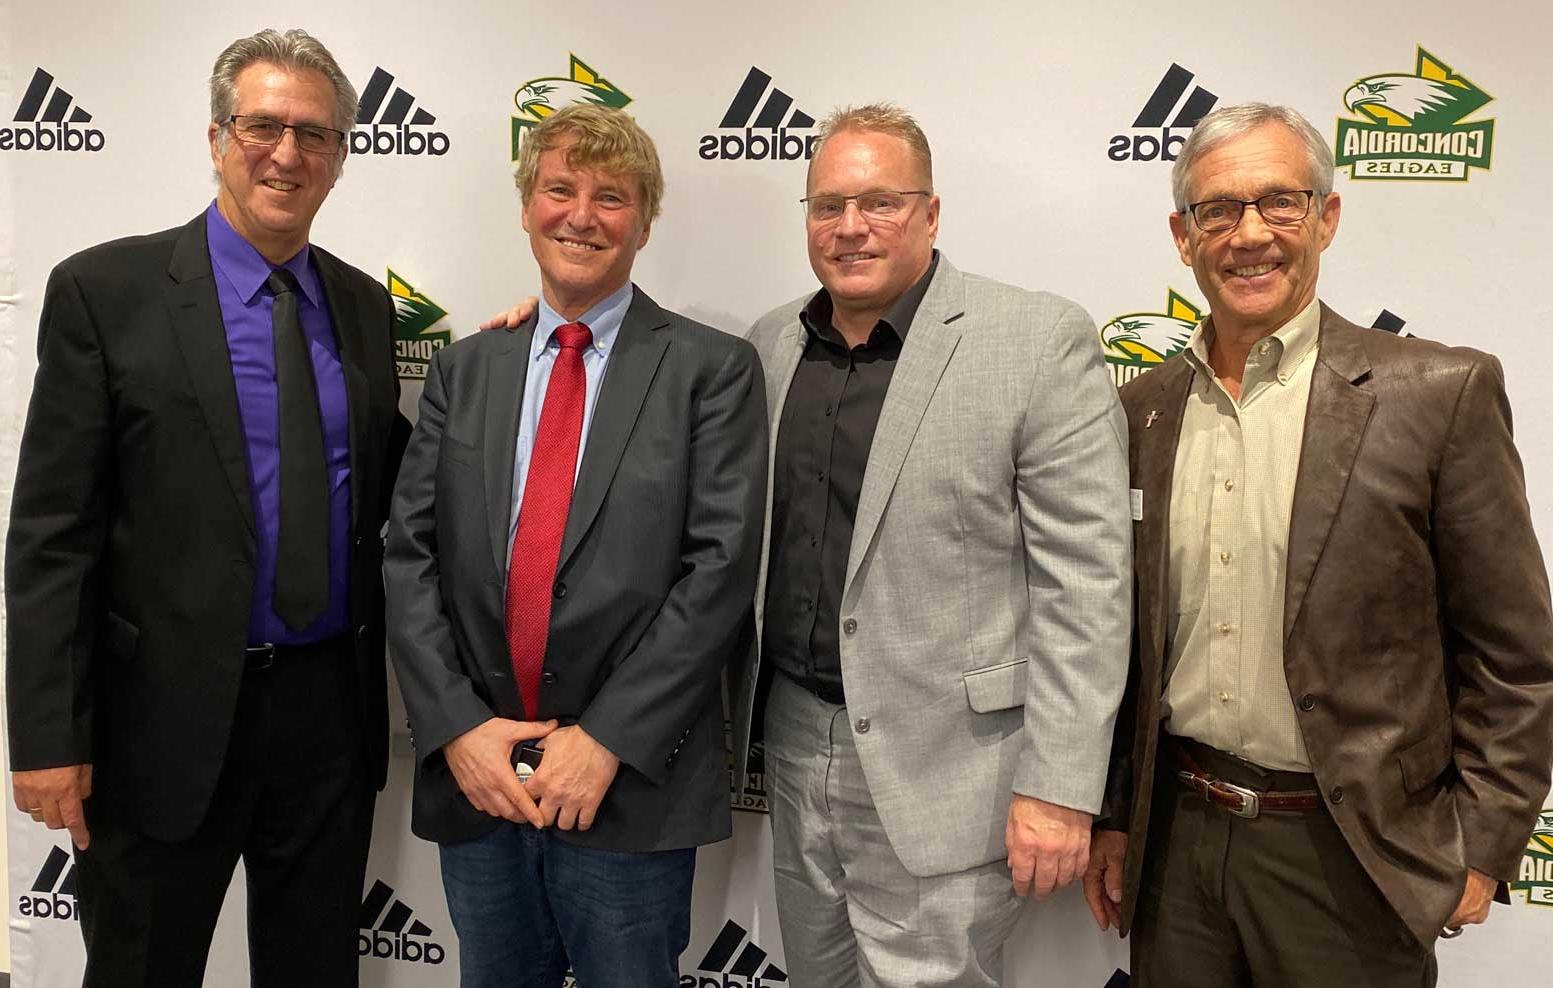 Prof. Emeritus Curt Cattau, Prof. Mark Francis, Leigh Steinberg, and George Wright, dean of
the School of Business and Economics at the Sports Business Executive Speaker Series.